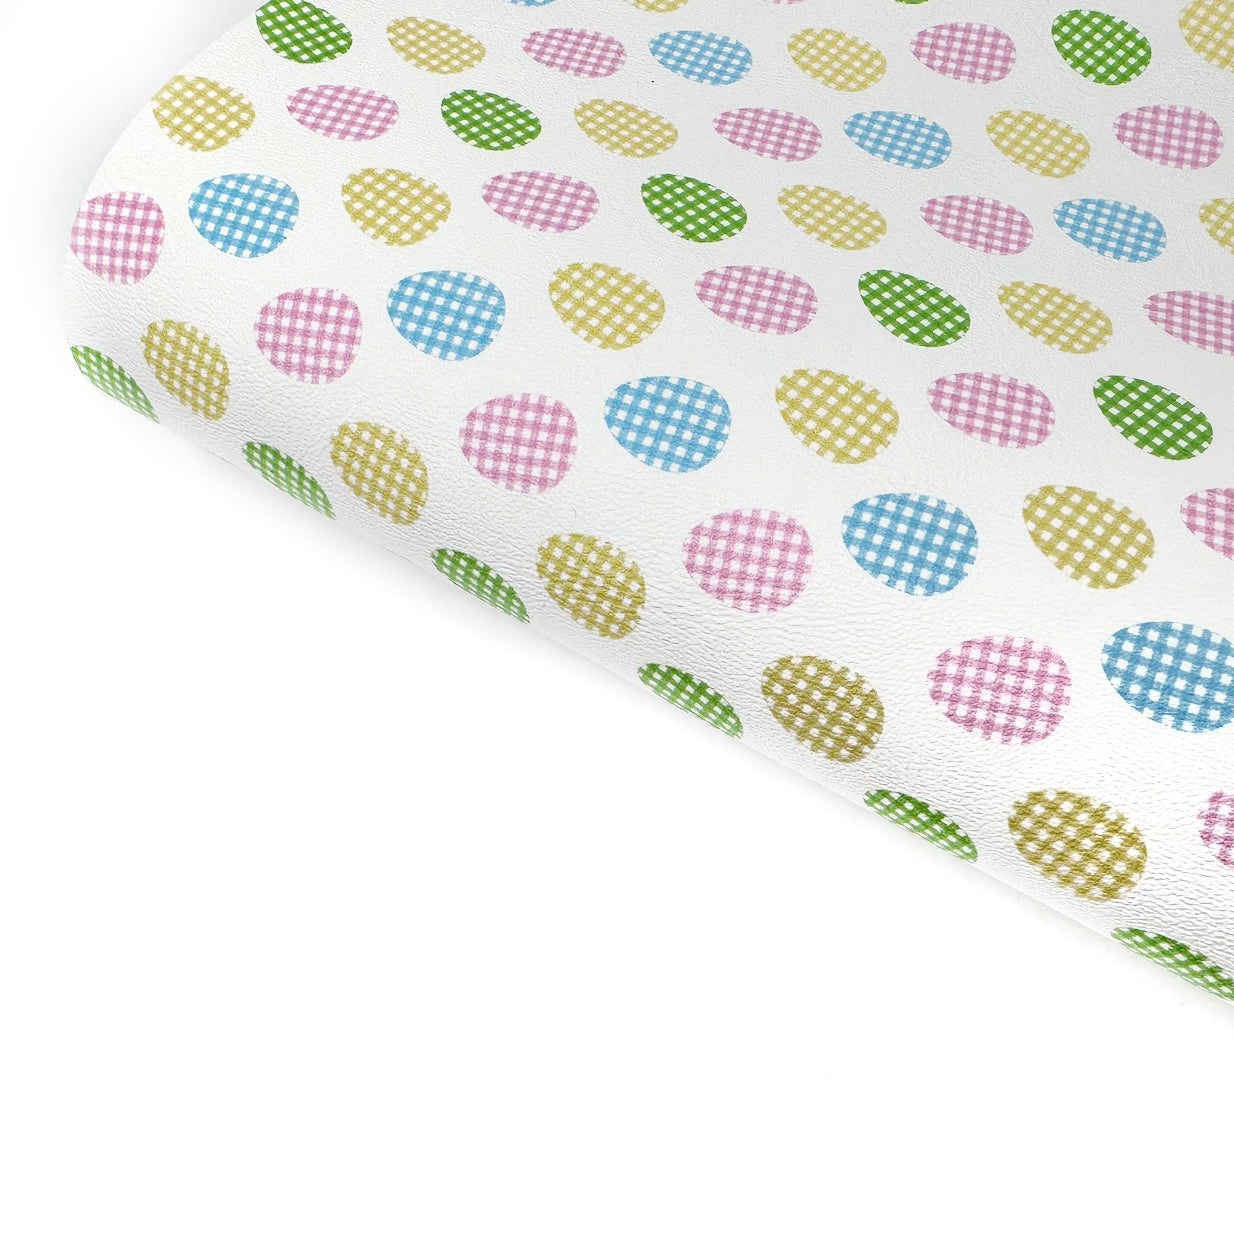 Gingham Easter Eggs Premium Faux Leather Fabric Sheets